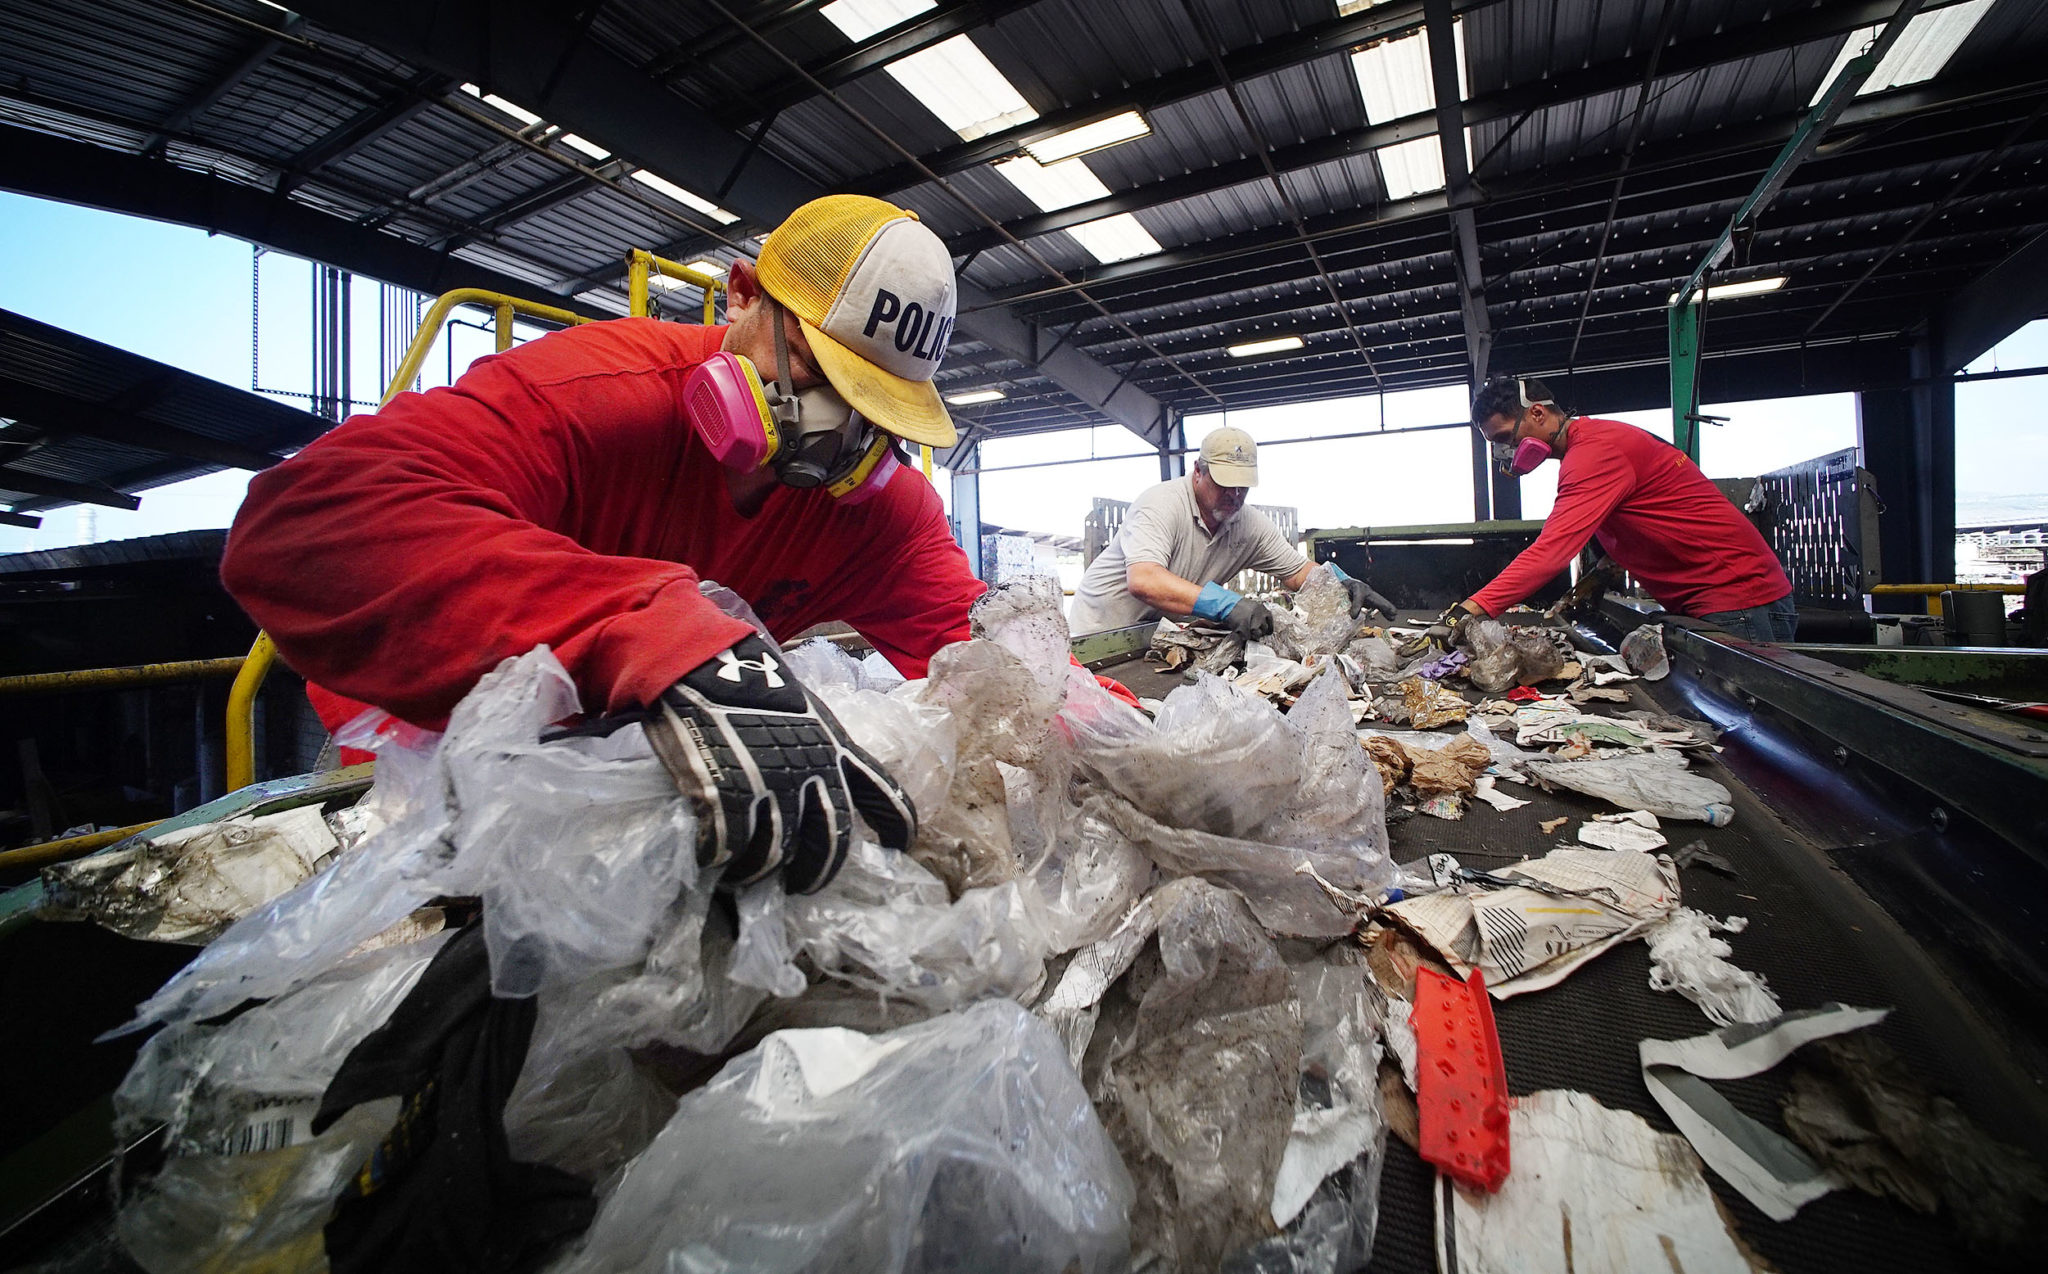 Workers pull plastic off of conveyor belt at RRR Recycling Services Hawaii.